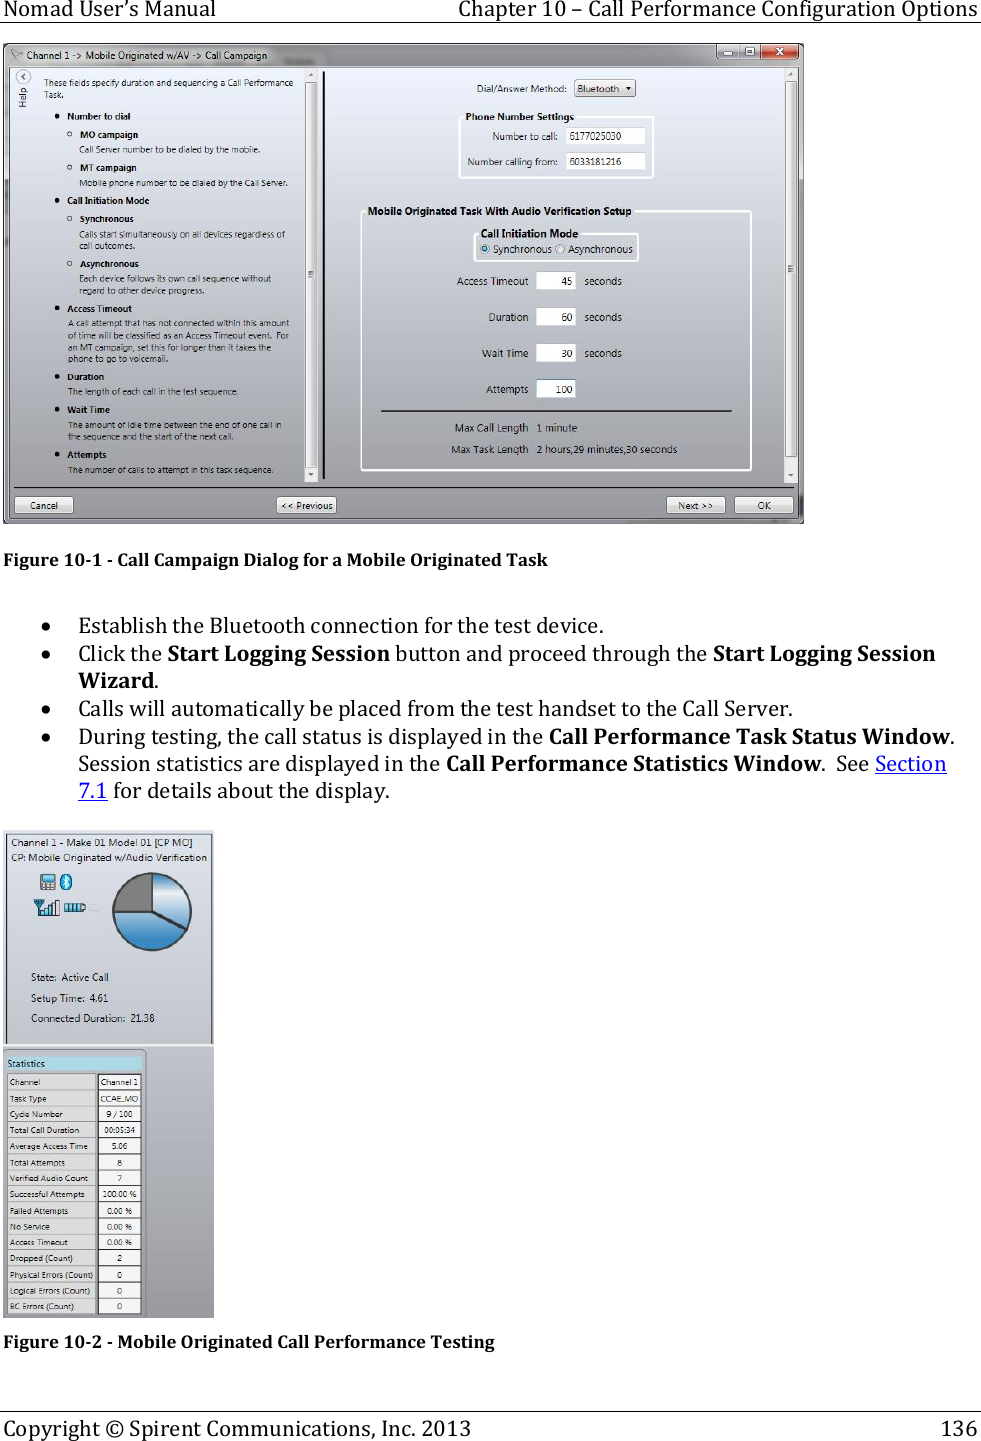  Nomad User’s Manual  Chapter 10 – Call Performance Configuration Options Copyright © Spirent Communications, Inc. 2013    136   Figure 10-1 - Call Campaign Dialog for a Mobile Originated Task   Establish the Bluetooth connection for the test device.  Click the Start Logging Session button and proceed through the Start Logging Session Wizard.  Calls will automatically be placed from the test handset to the Call Server.  During testing, the call status is displayed in the Call Performance Task Status Window.  Session statistics are displayed in the Call Performance Statistics Window.  See Section 7.1 for details about the display.   Figure 10-2 - Mobile Originated Call Performance Testing 